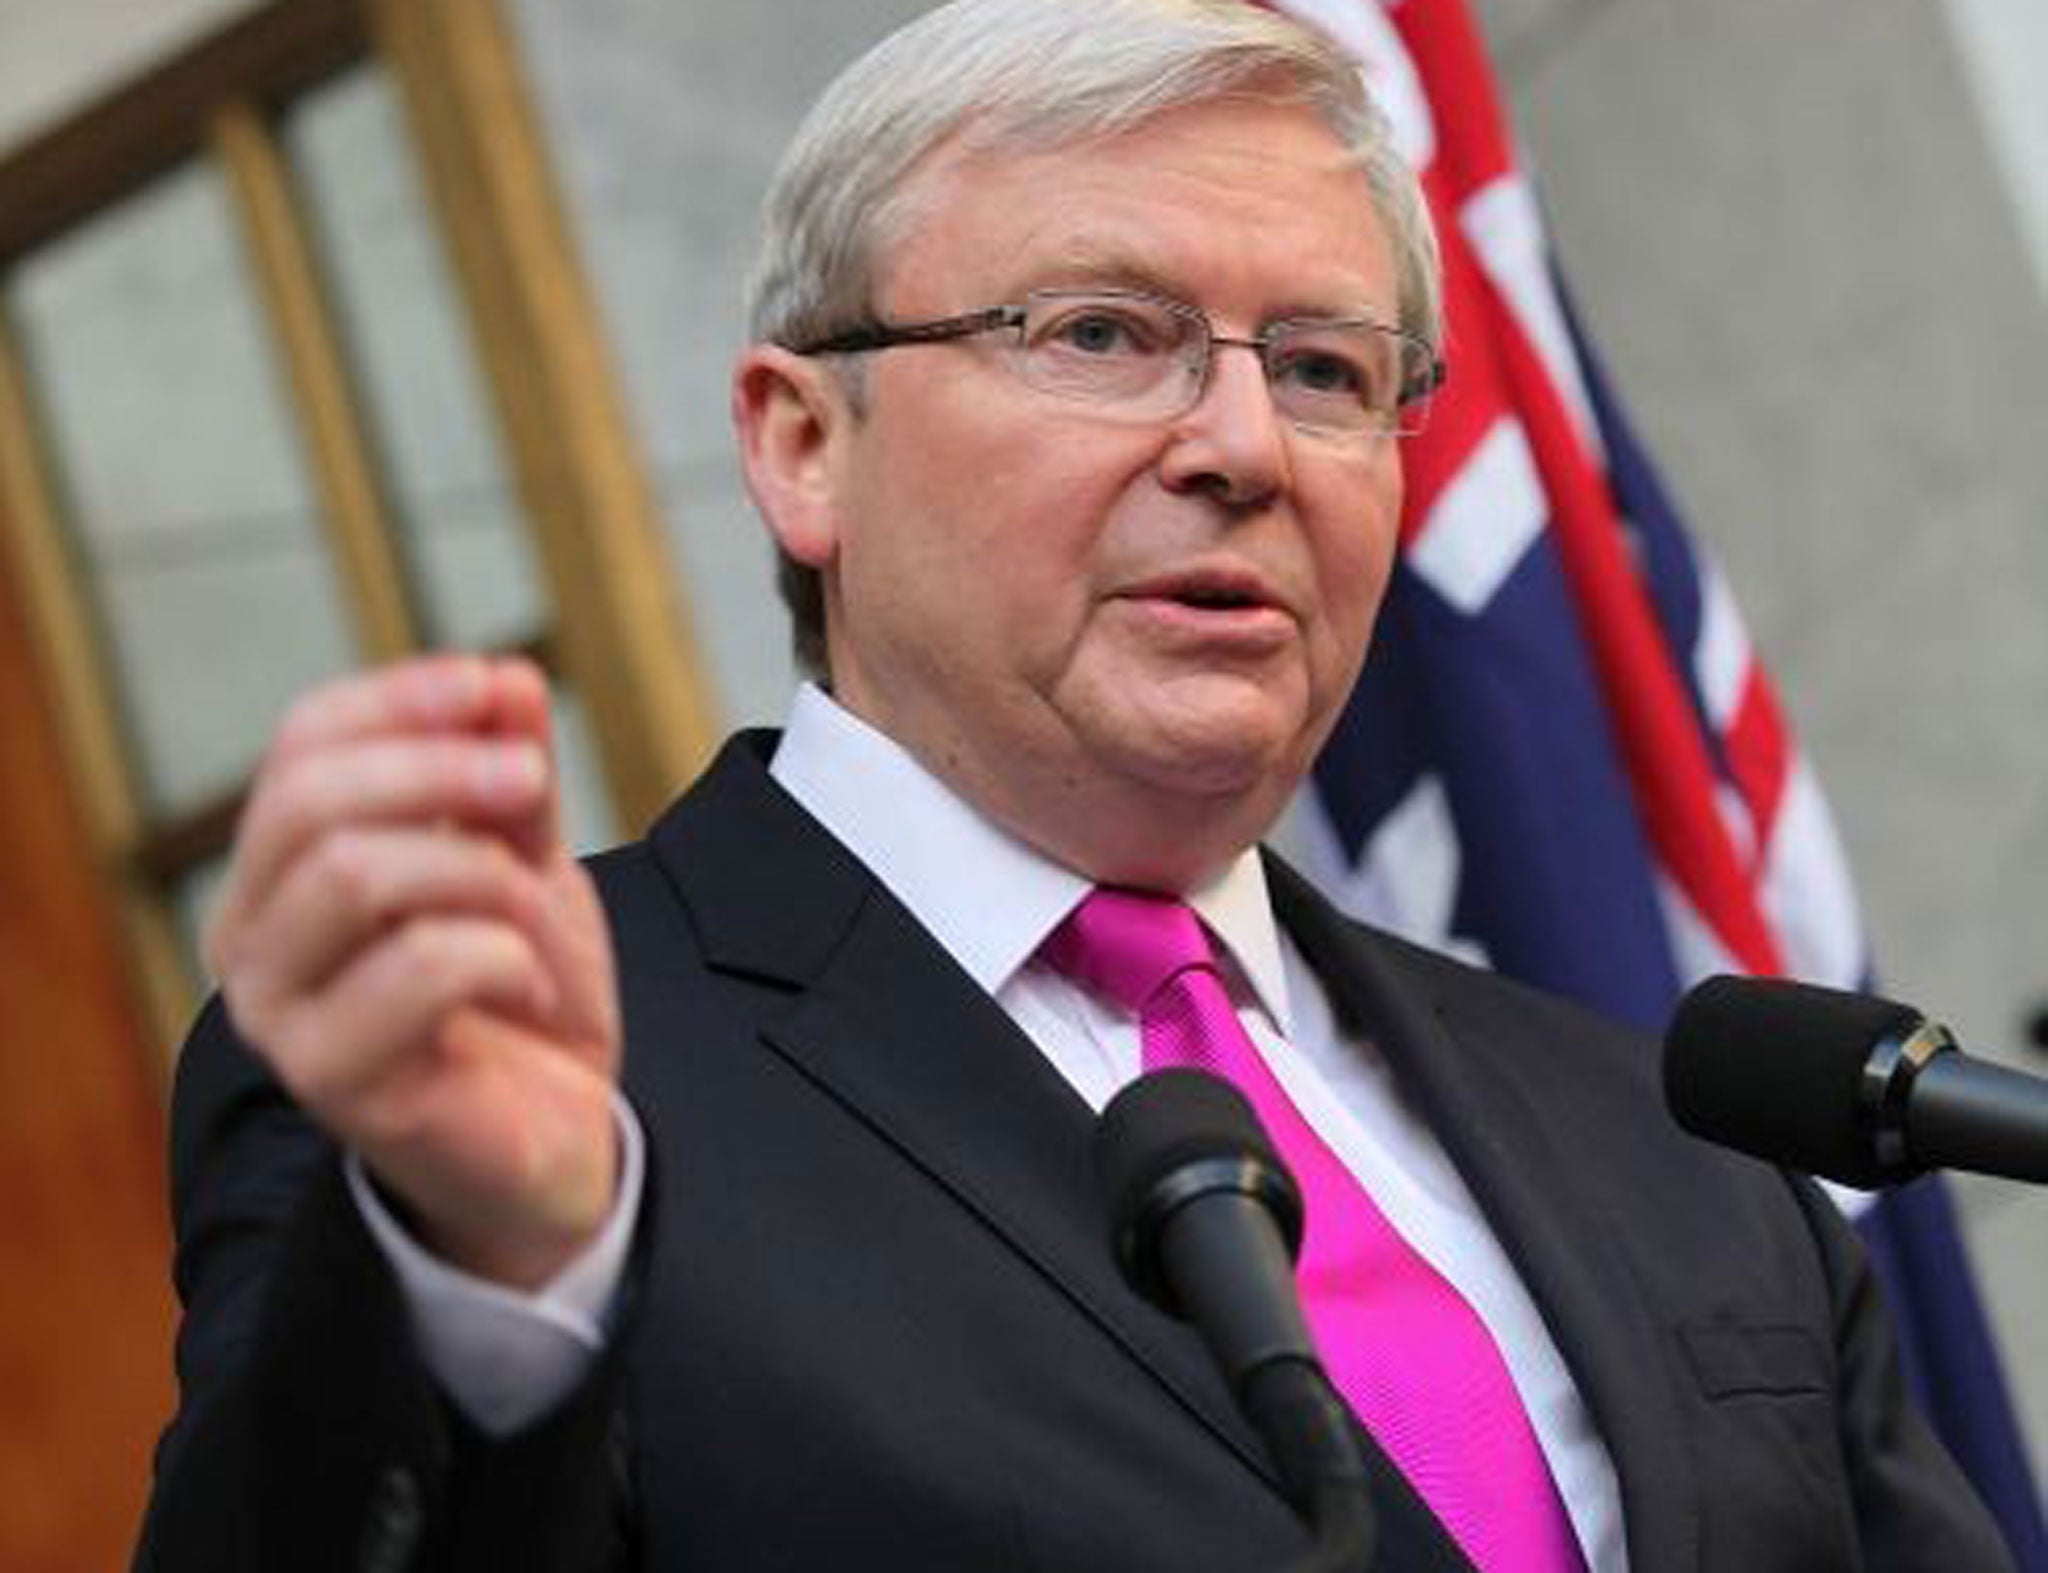 Kevin Rudd has called an election for next month